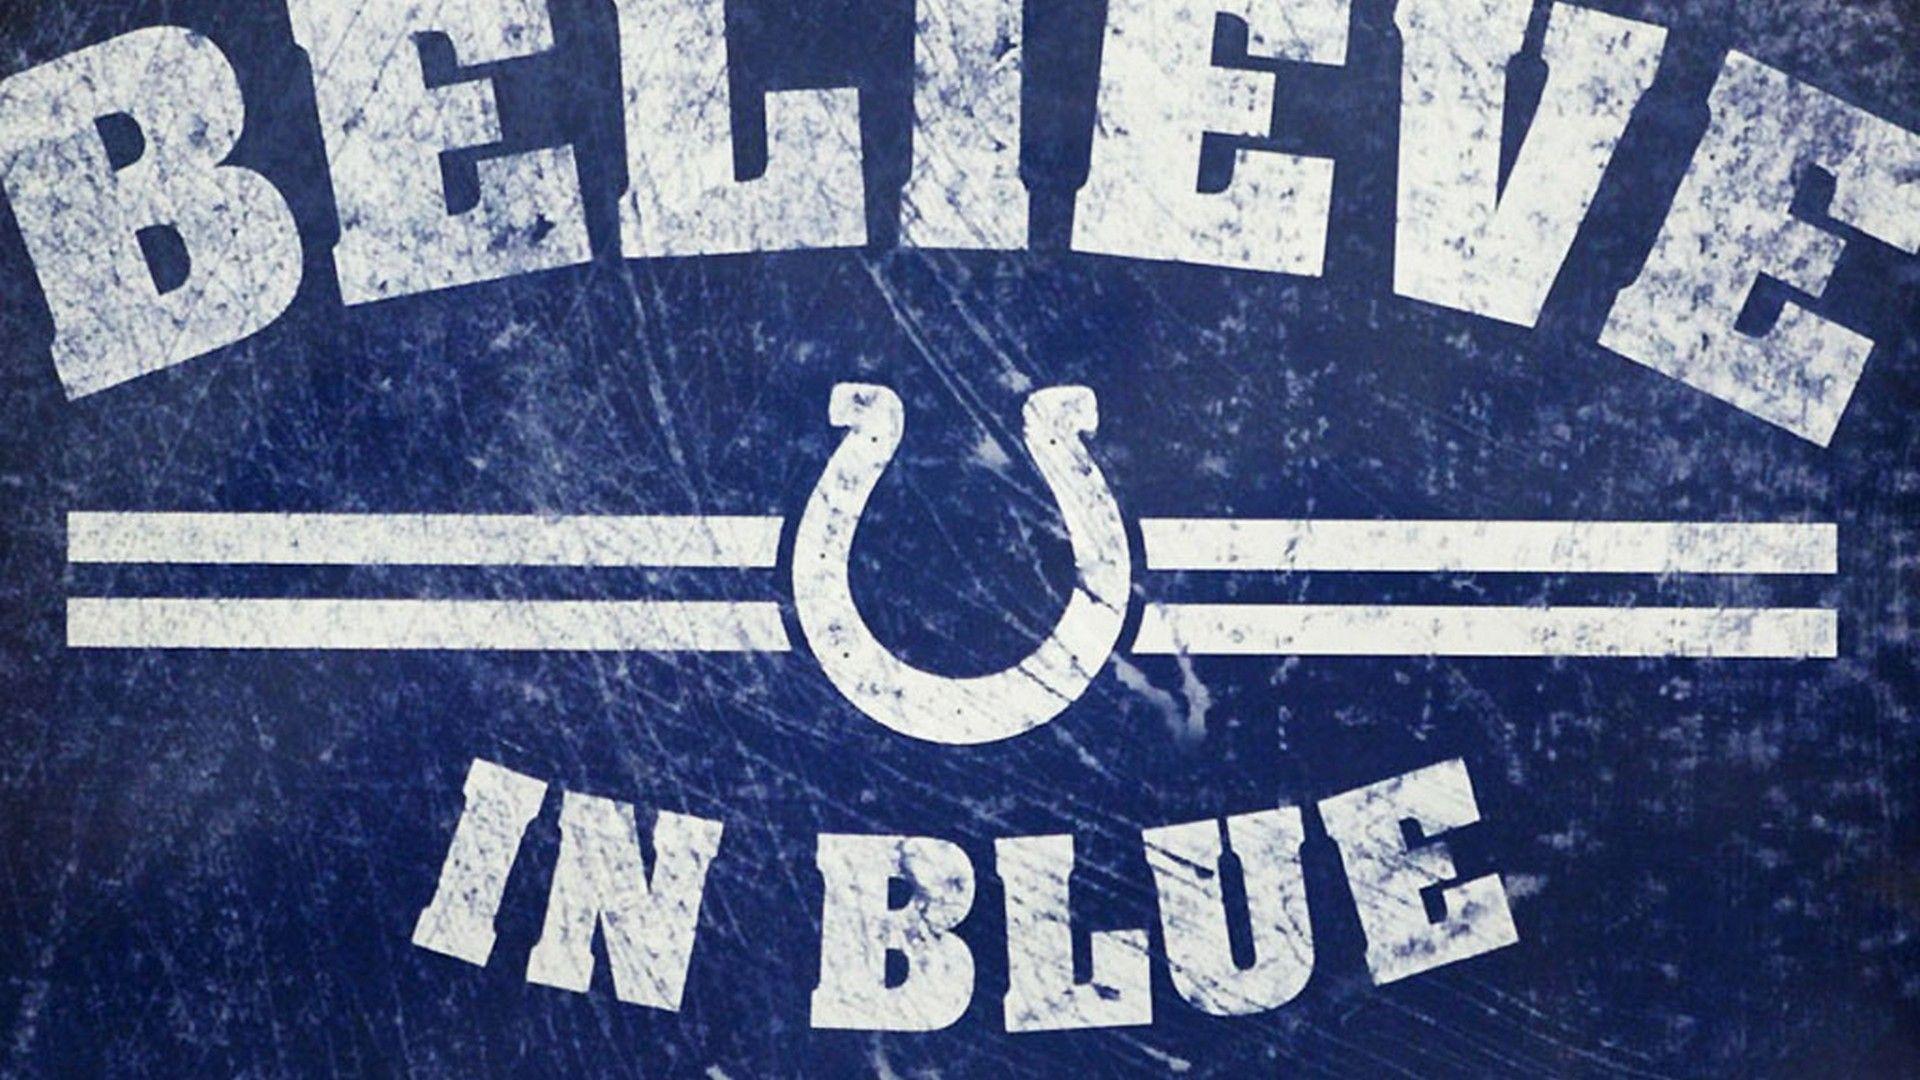 Indianapolis Colts For PC Wallpaper. Wallpaper